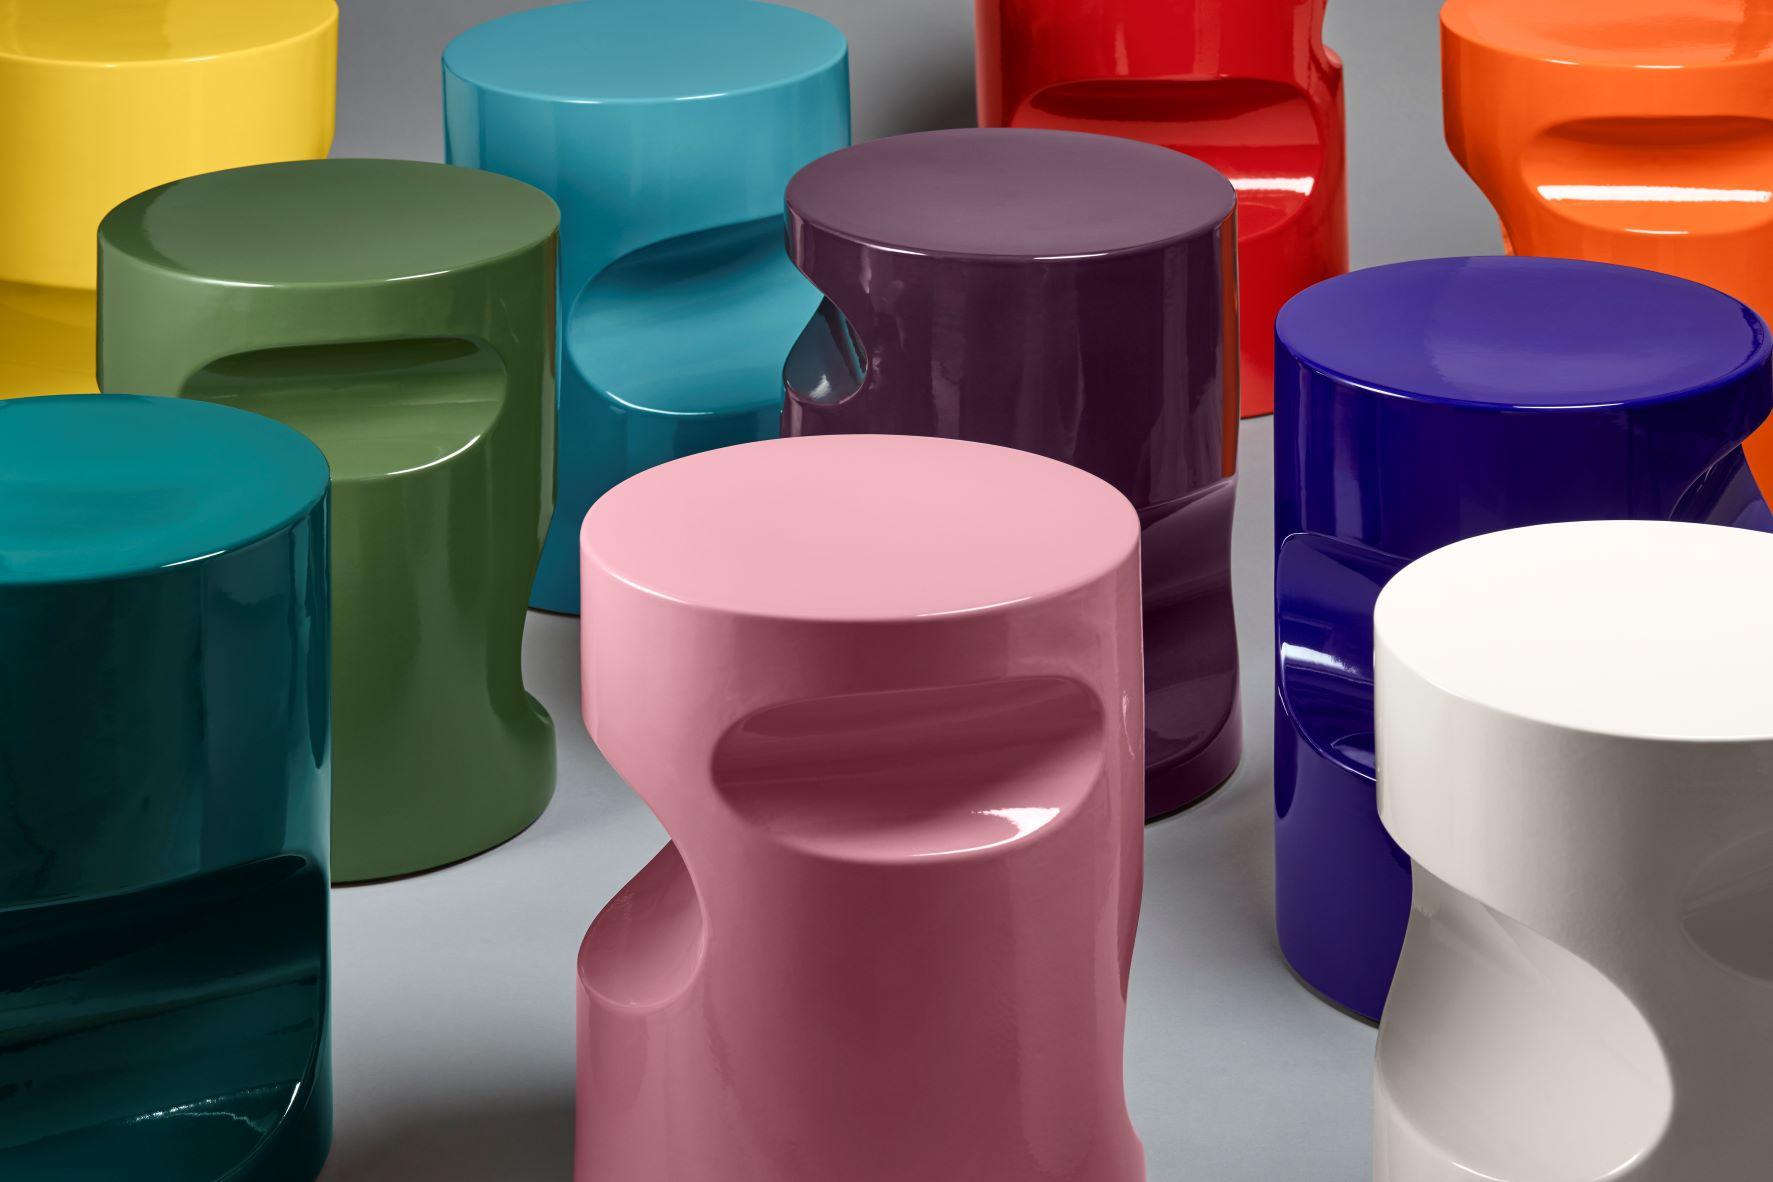 Fétiche ceramic stool designed by Hervé Langlais for Galerie Negropontes. Available in different colors. 

French designer Herve Langlais created a series of stools/pouf named after his Fetiche table lamp. Fetiche pouf are in ceramic with different